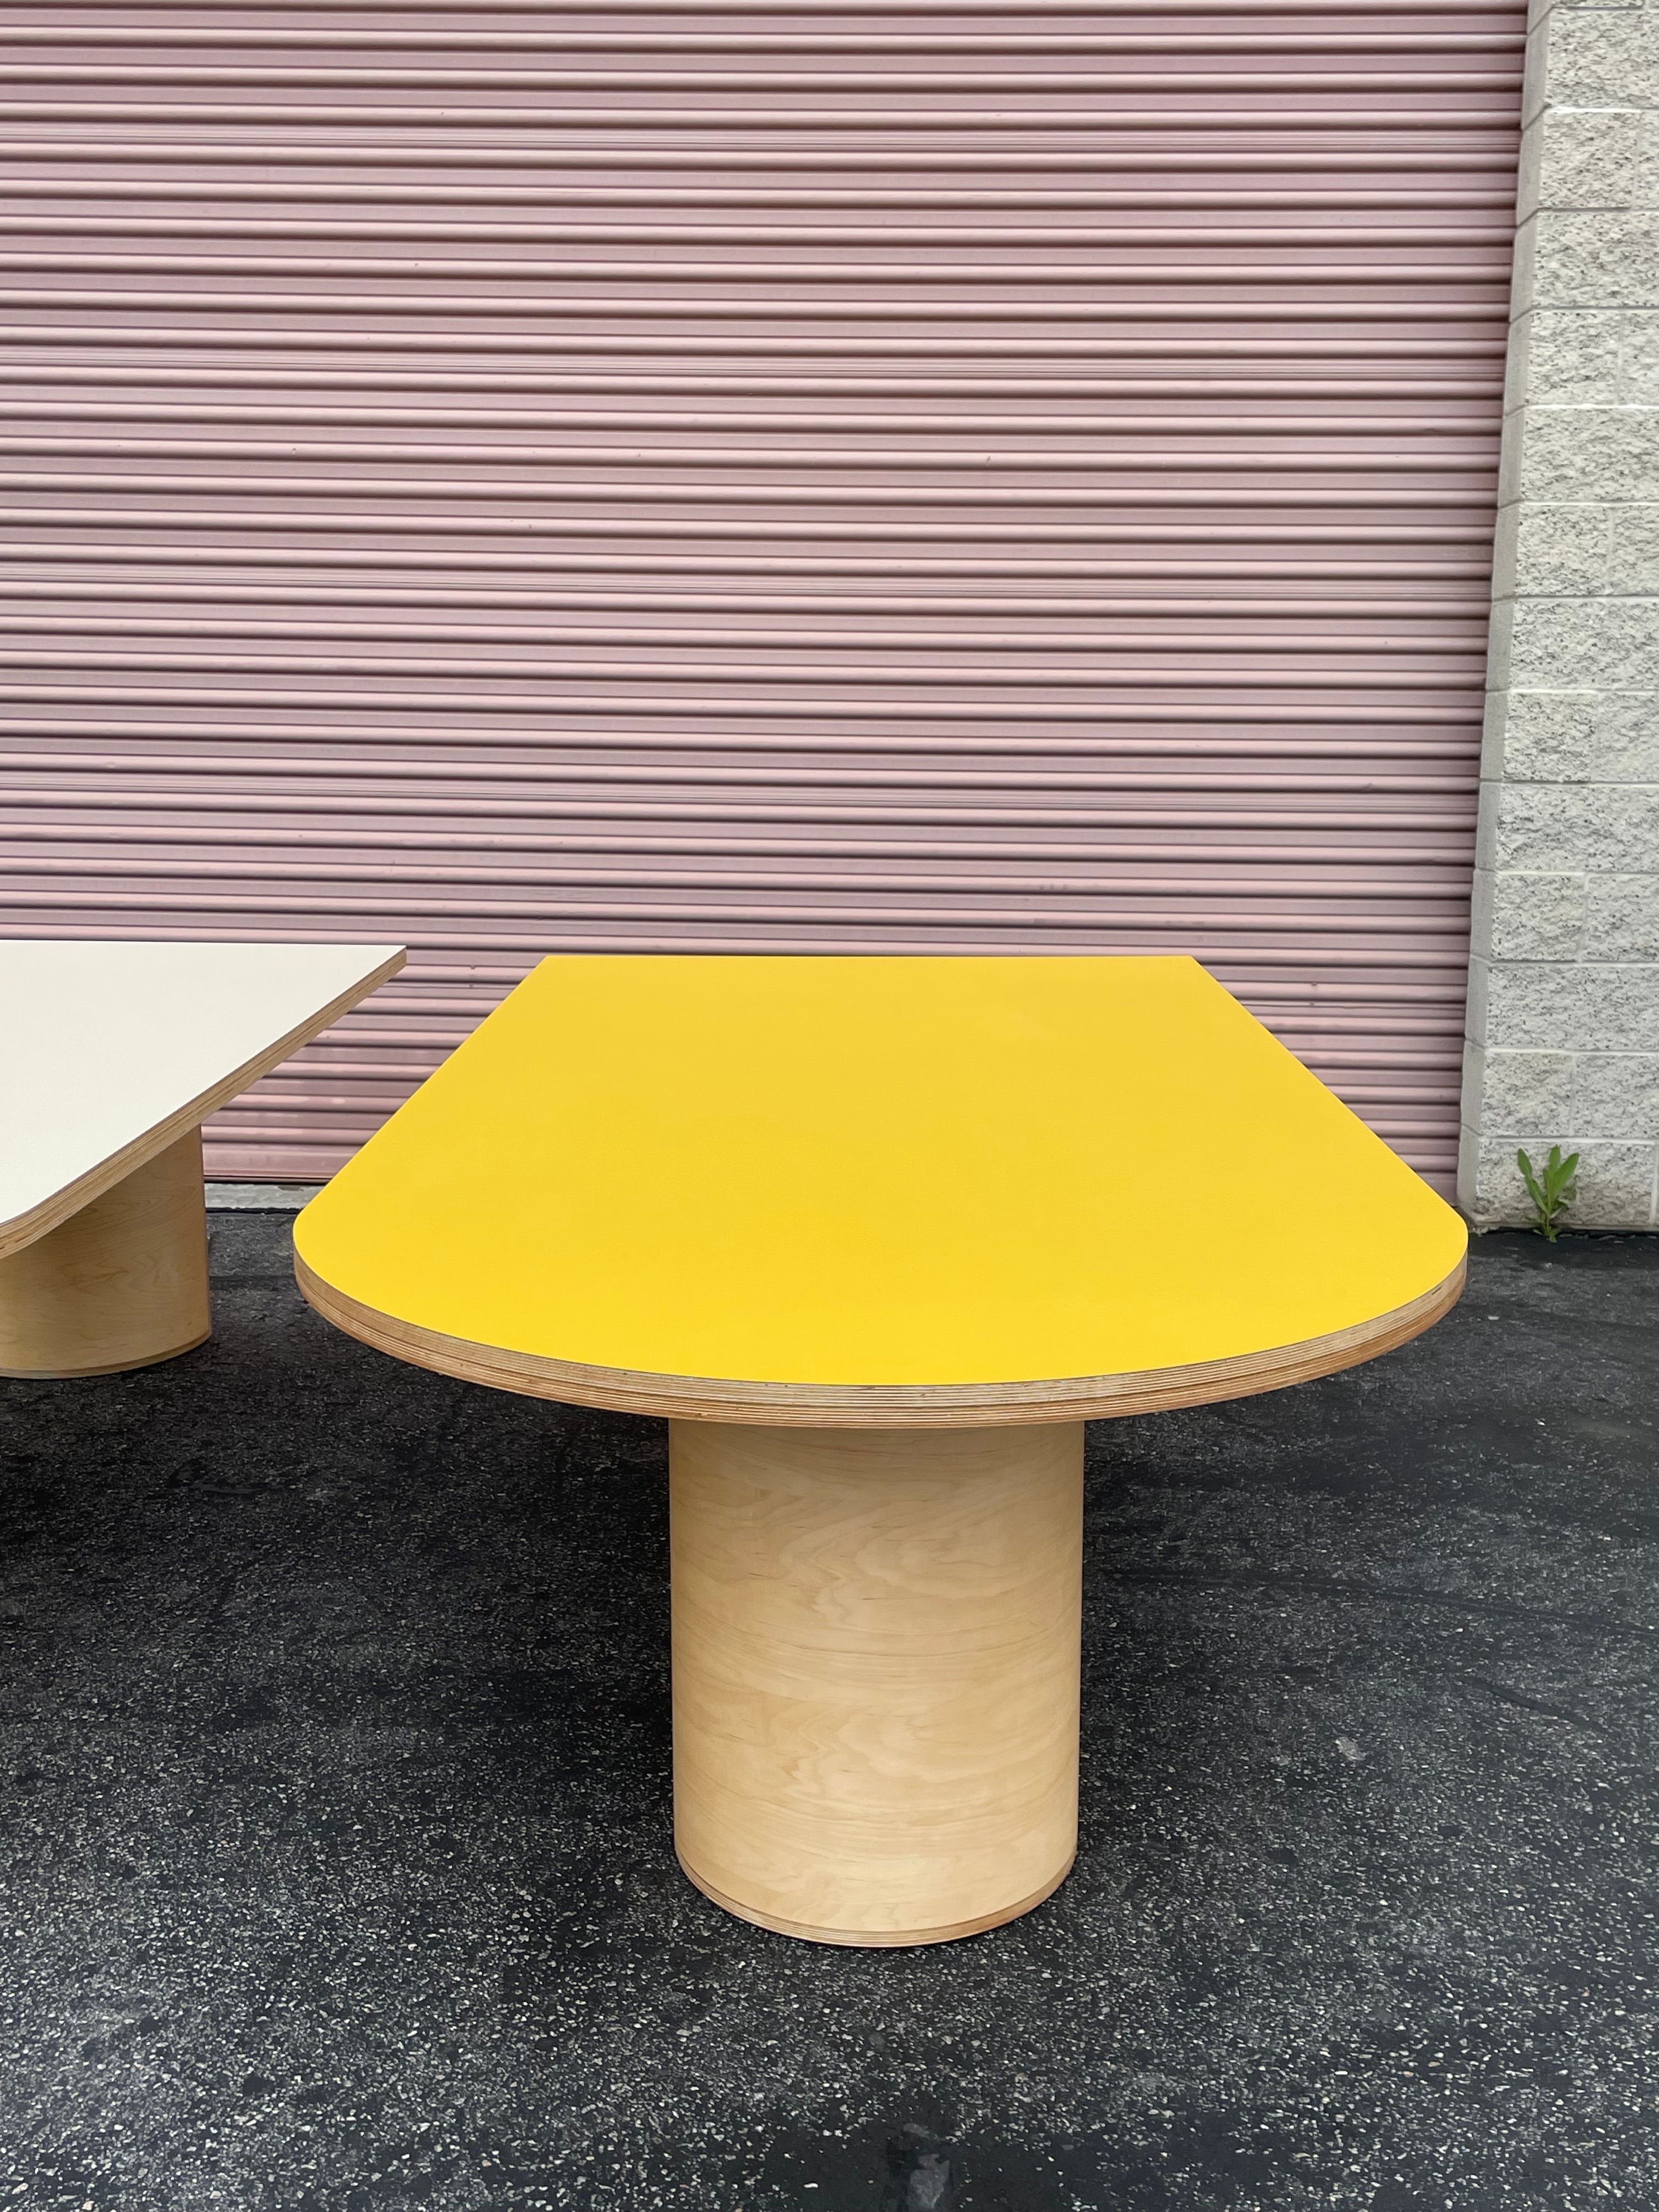  Community Tables - de Young Museum product image 7